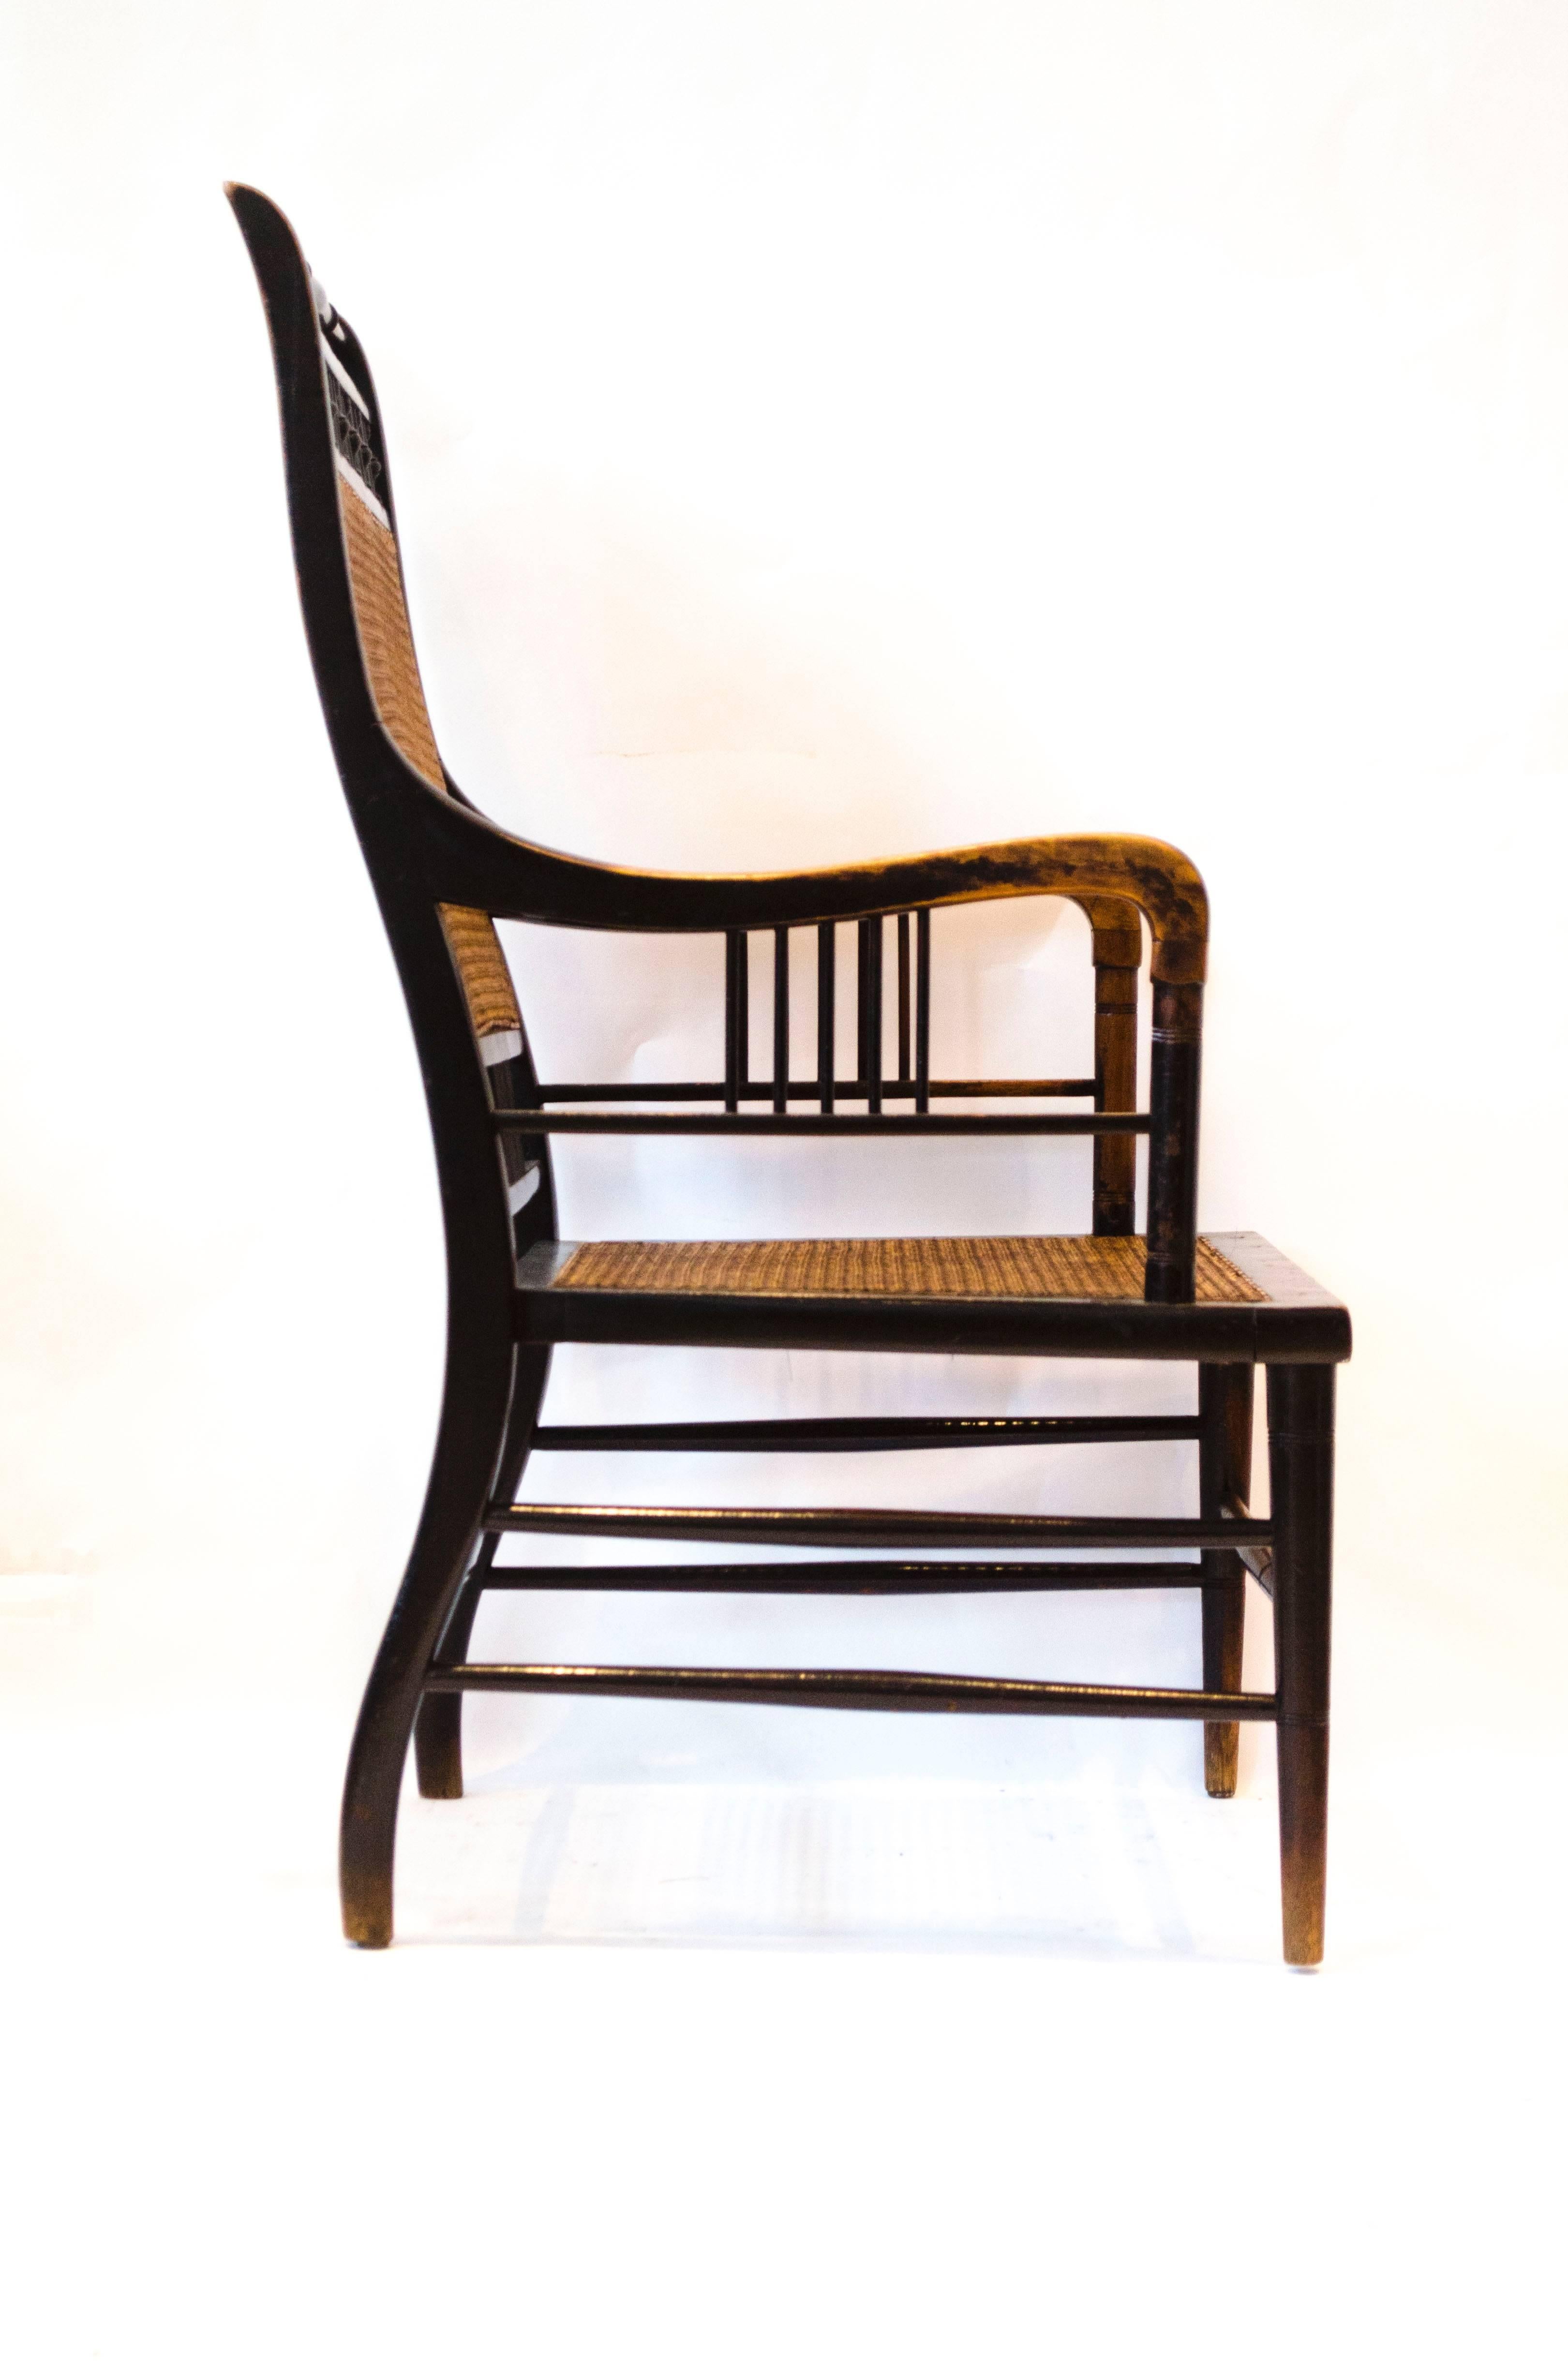 Edward William Godwin (1833-1886) for William Watt.
An ebonized beech and caned armchair. 
An identical armchair with an 'Heirloom' enamel label (William Watts representatives) was purchased by Tony Geering and Martin Wolfson from an auction by